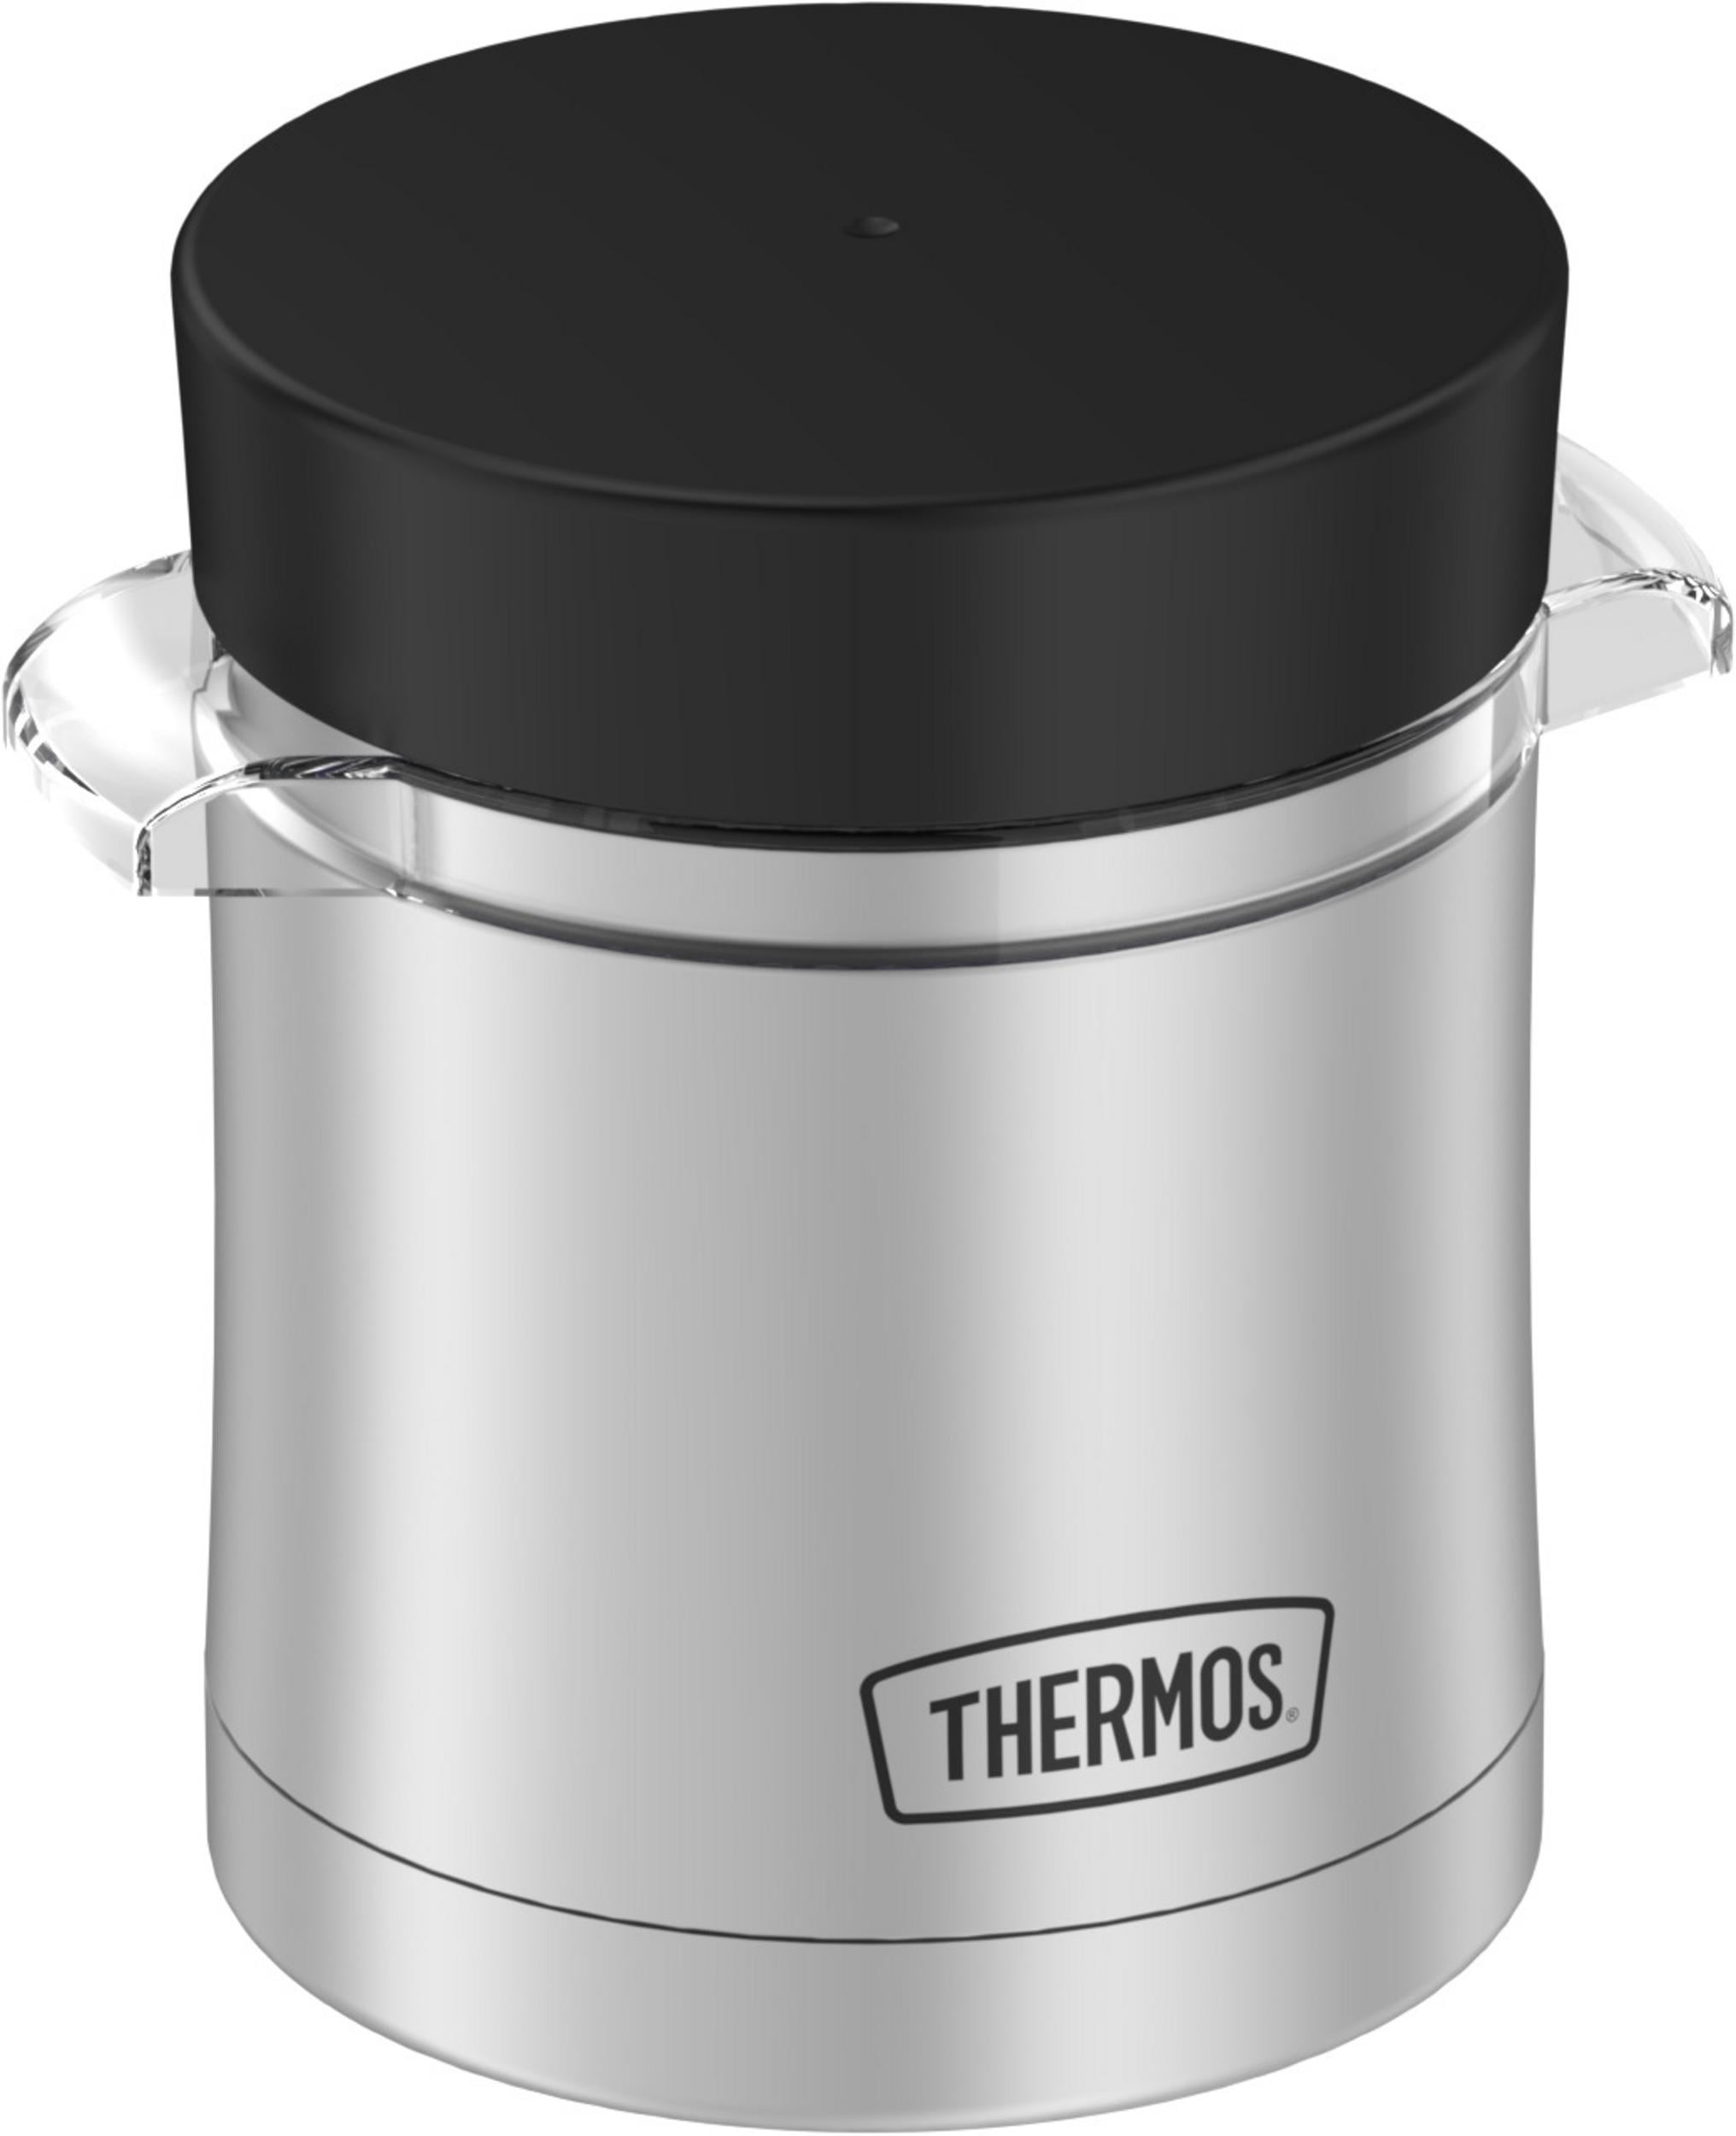 Thermos Microwavable Food Jar 16 Oz 2350tri6 for sale online